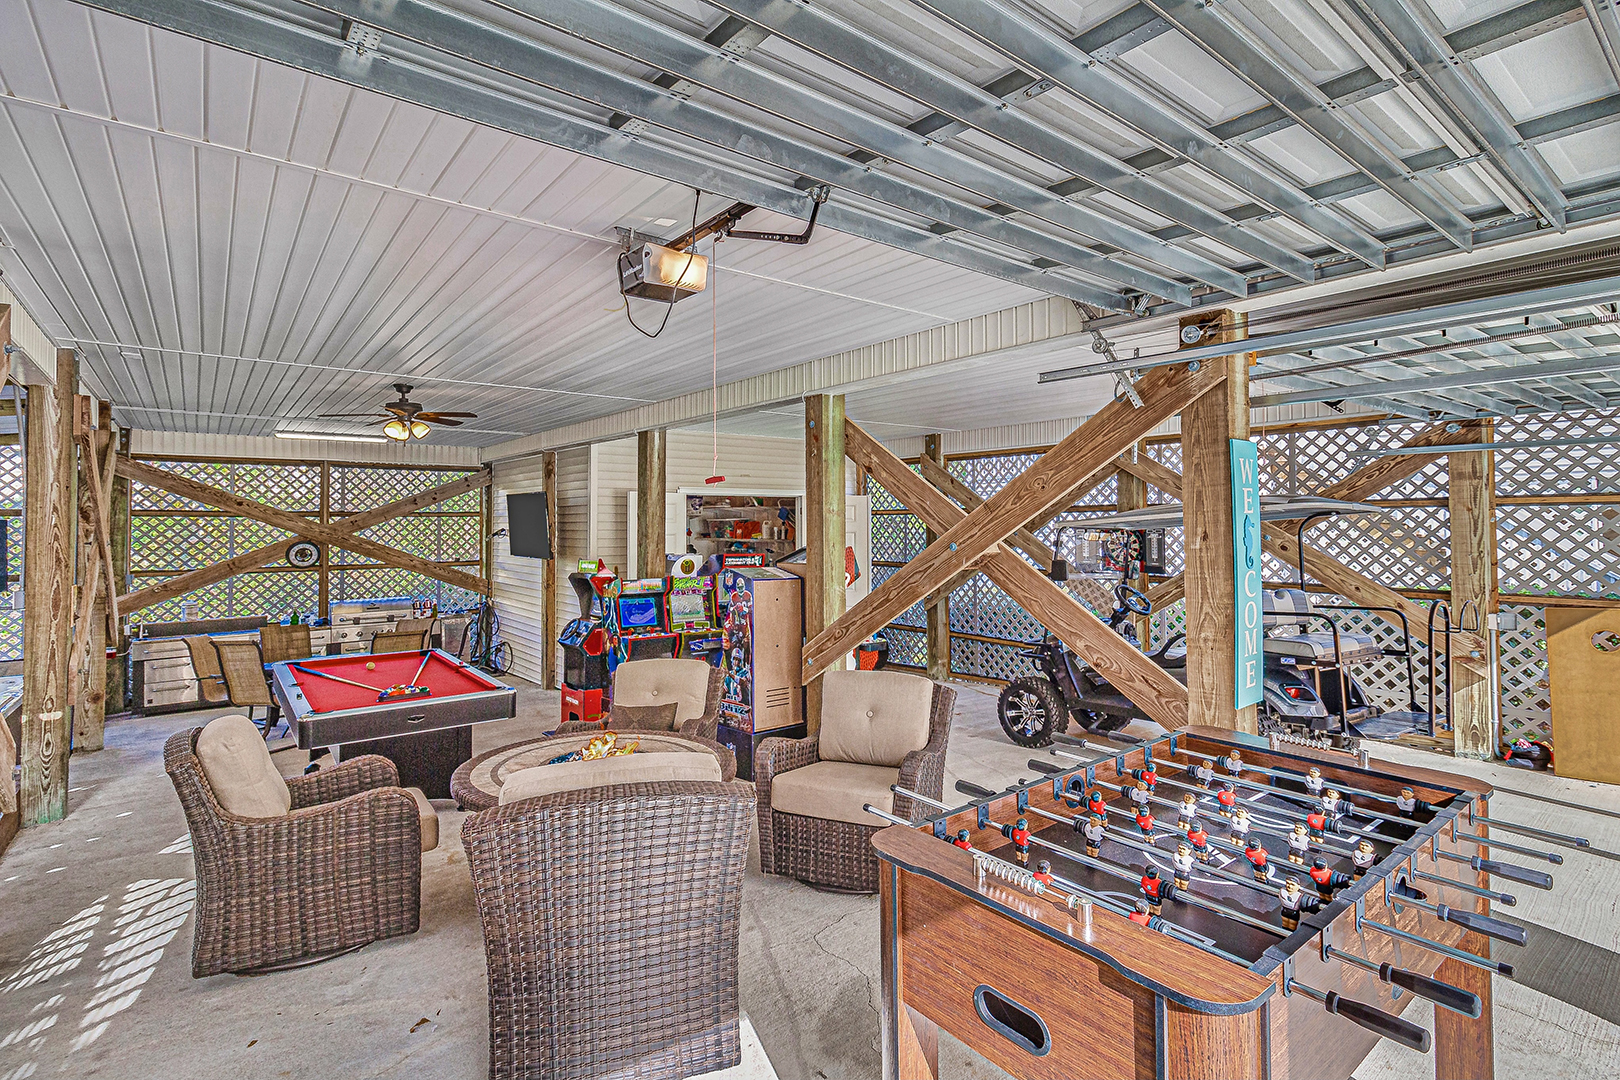 Huge room with indoor games and furniture